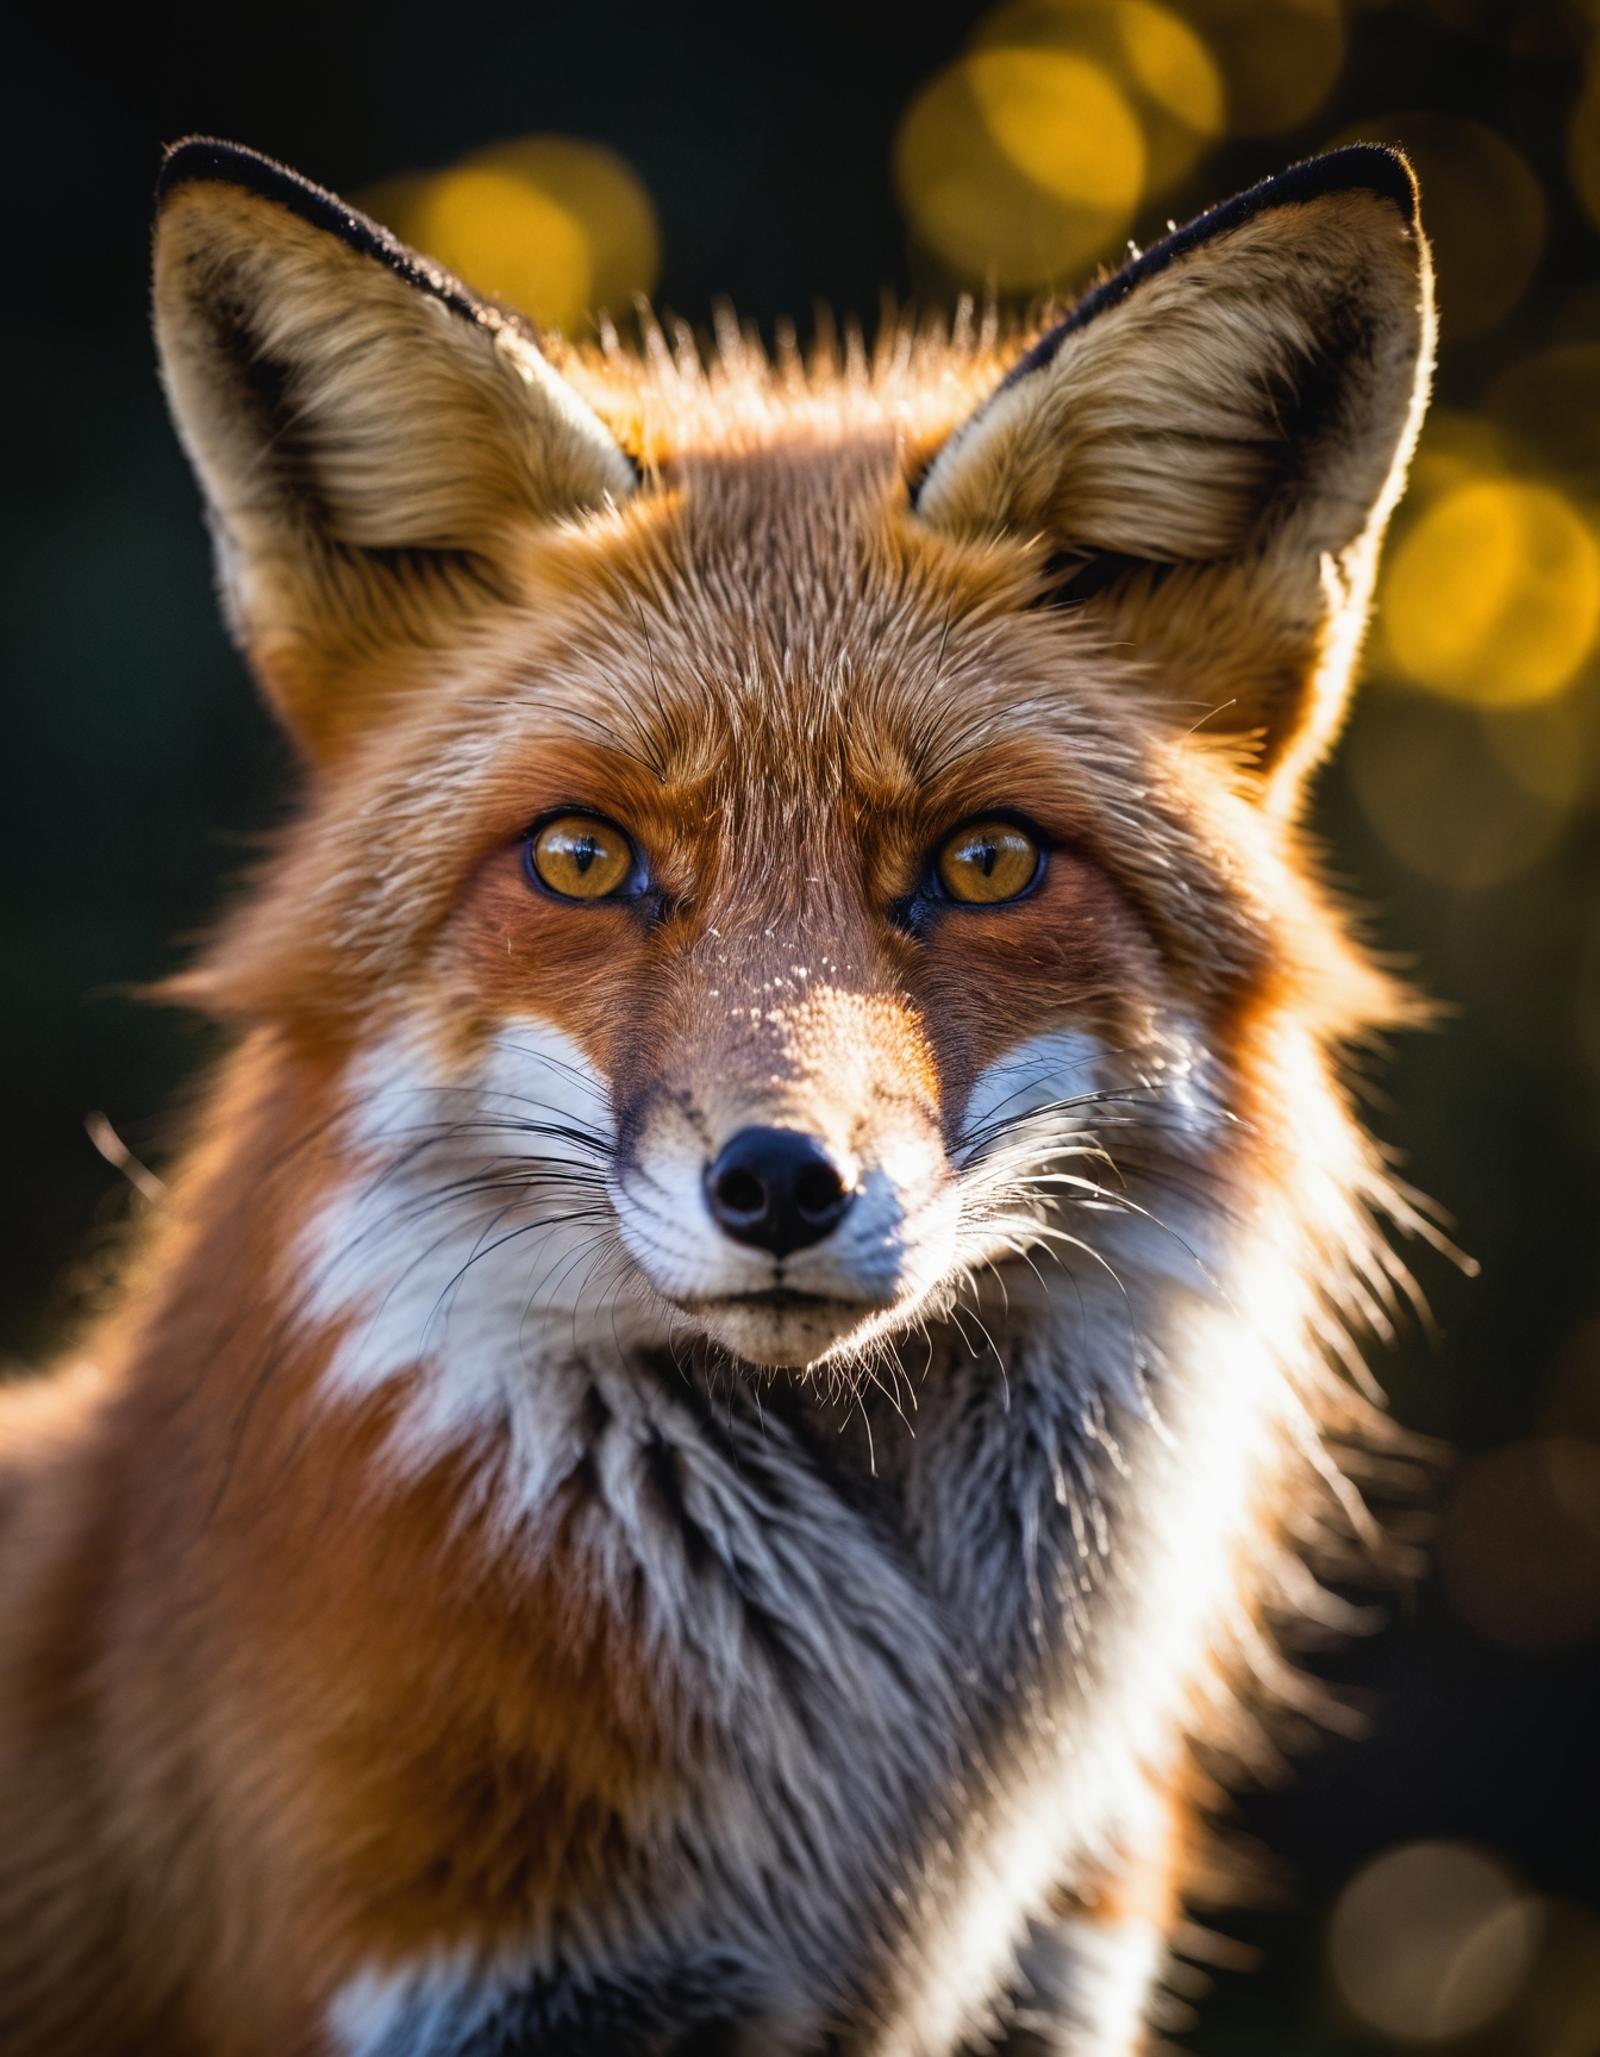 The close-up of a fox with yellow eyes looking straight ahead.